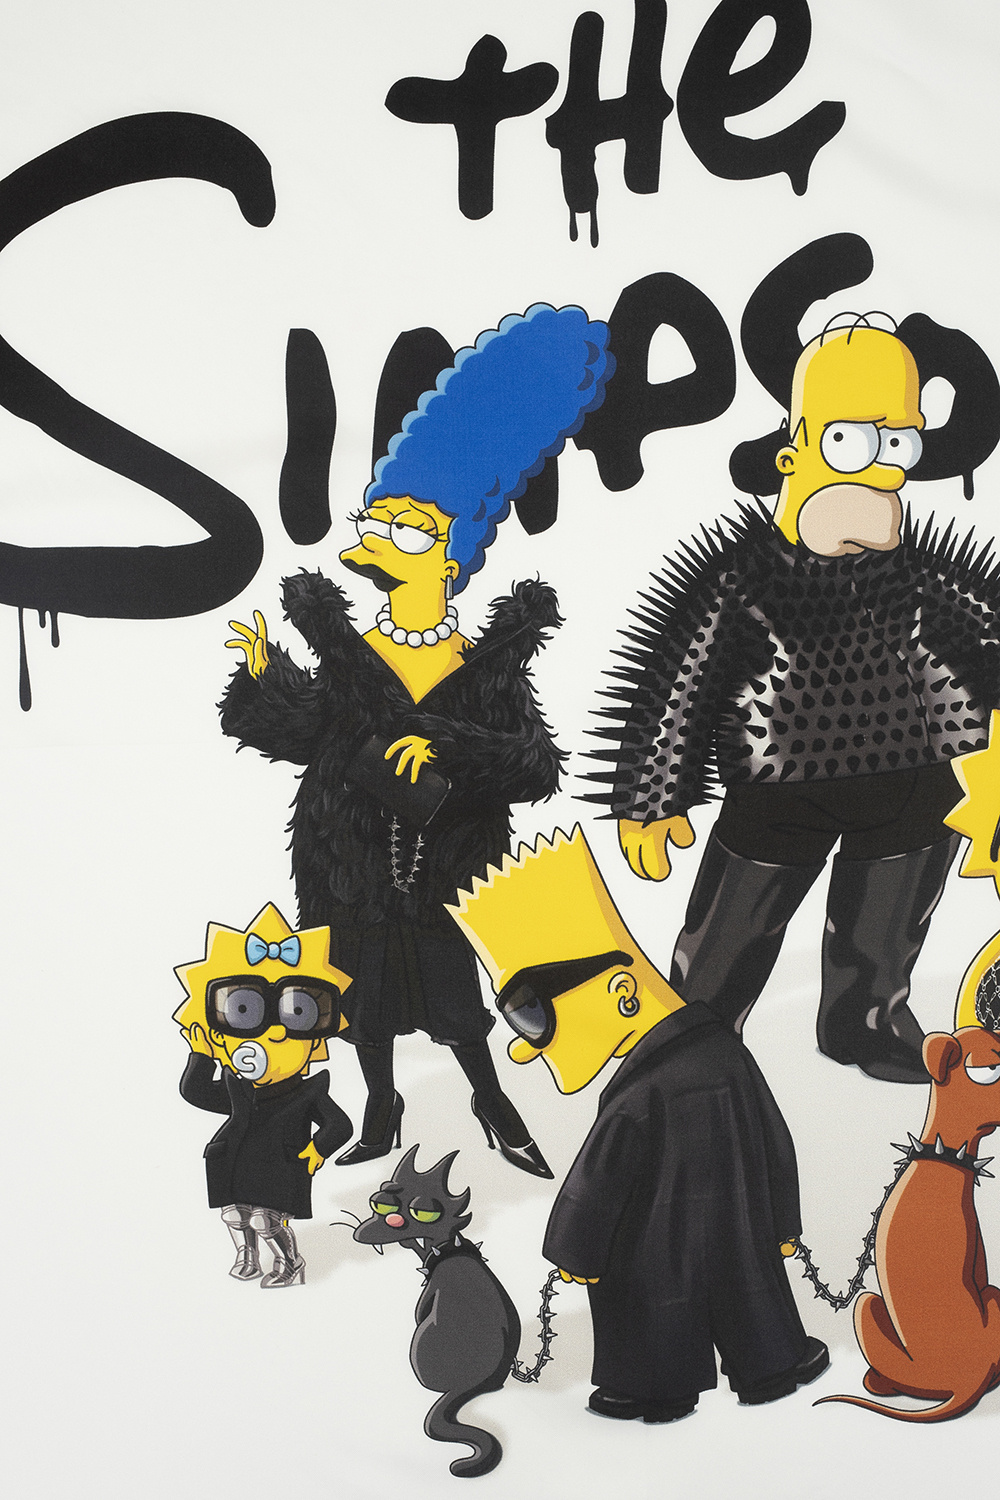 Balenciaga just dropped a capsule collection with The Simpsons